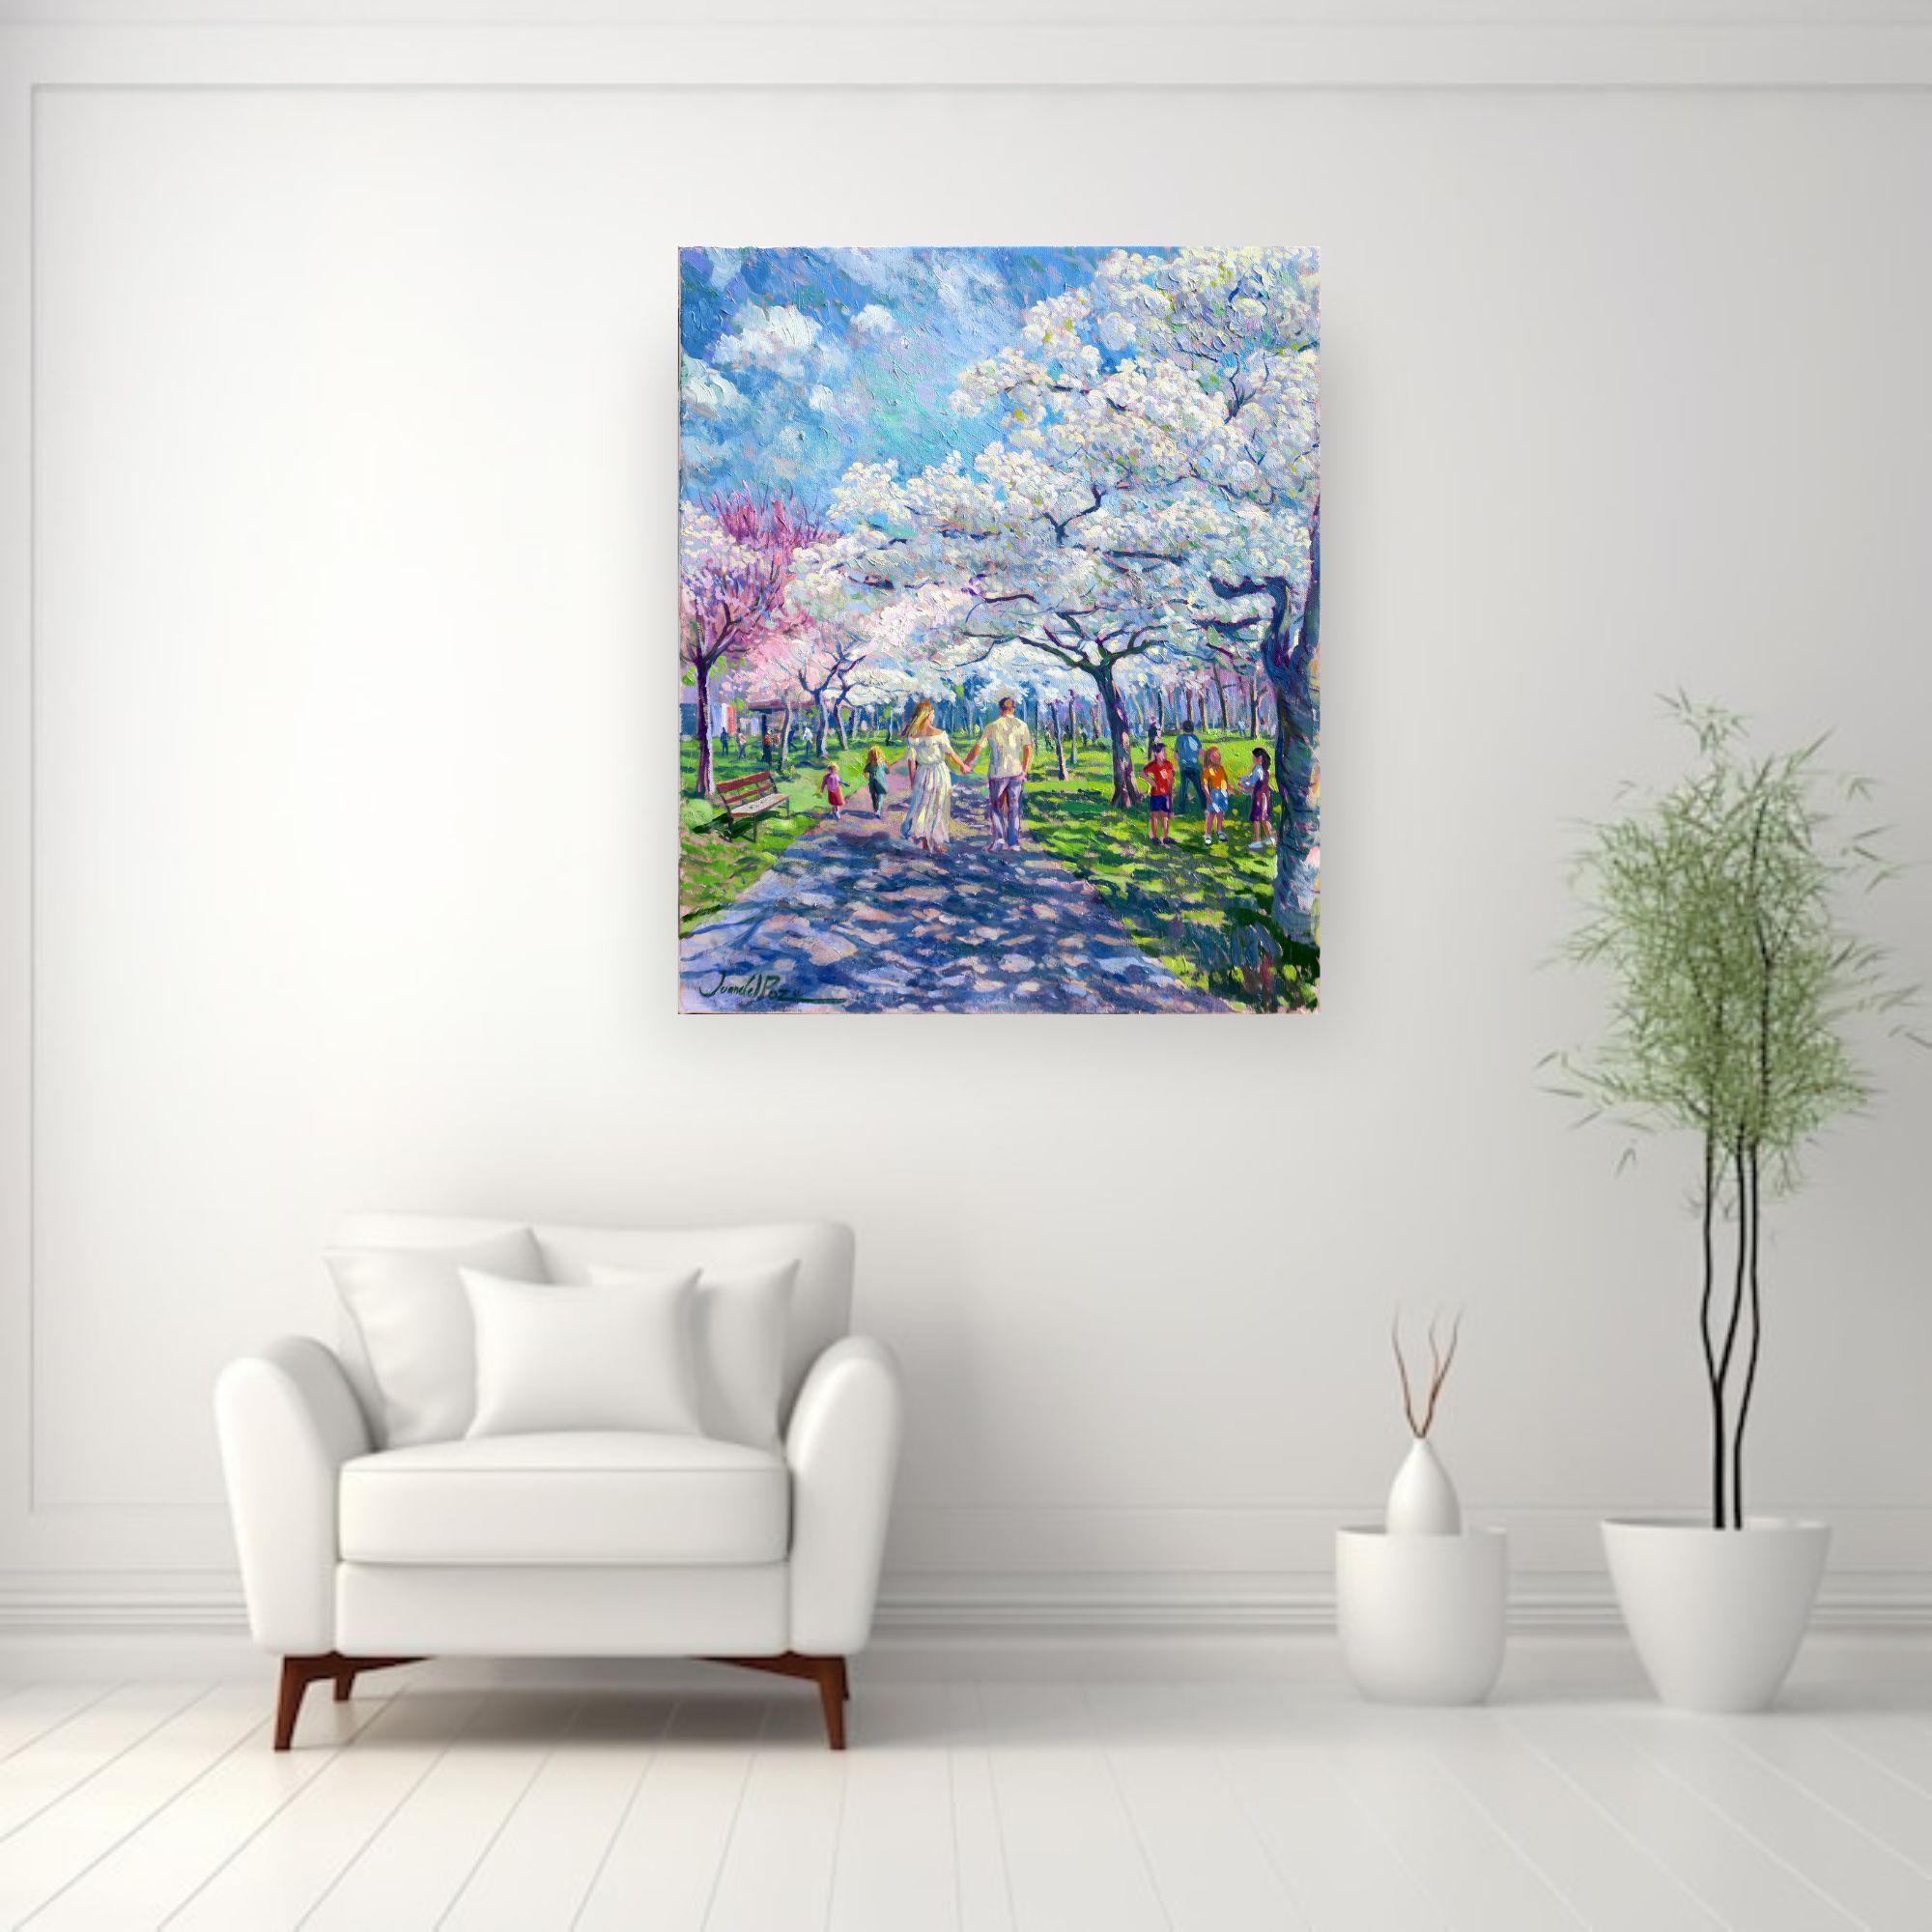 Lovers-original impressionism cityscape floral oil painting-contemporary art For Sale 1